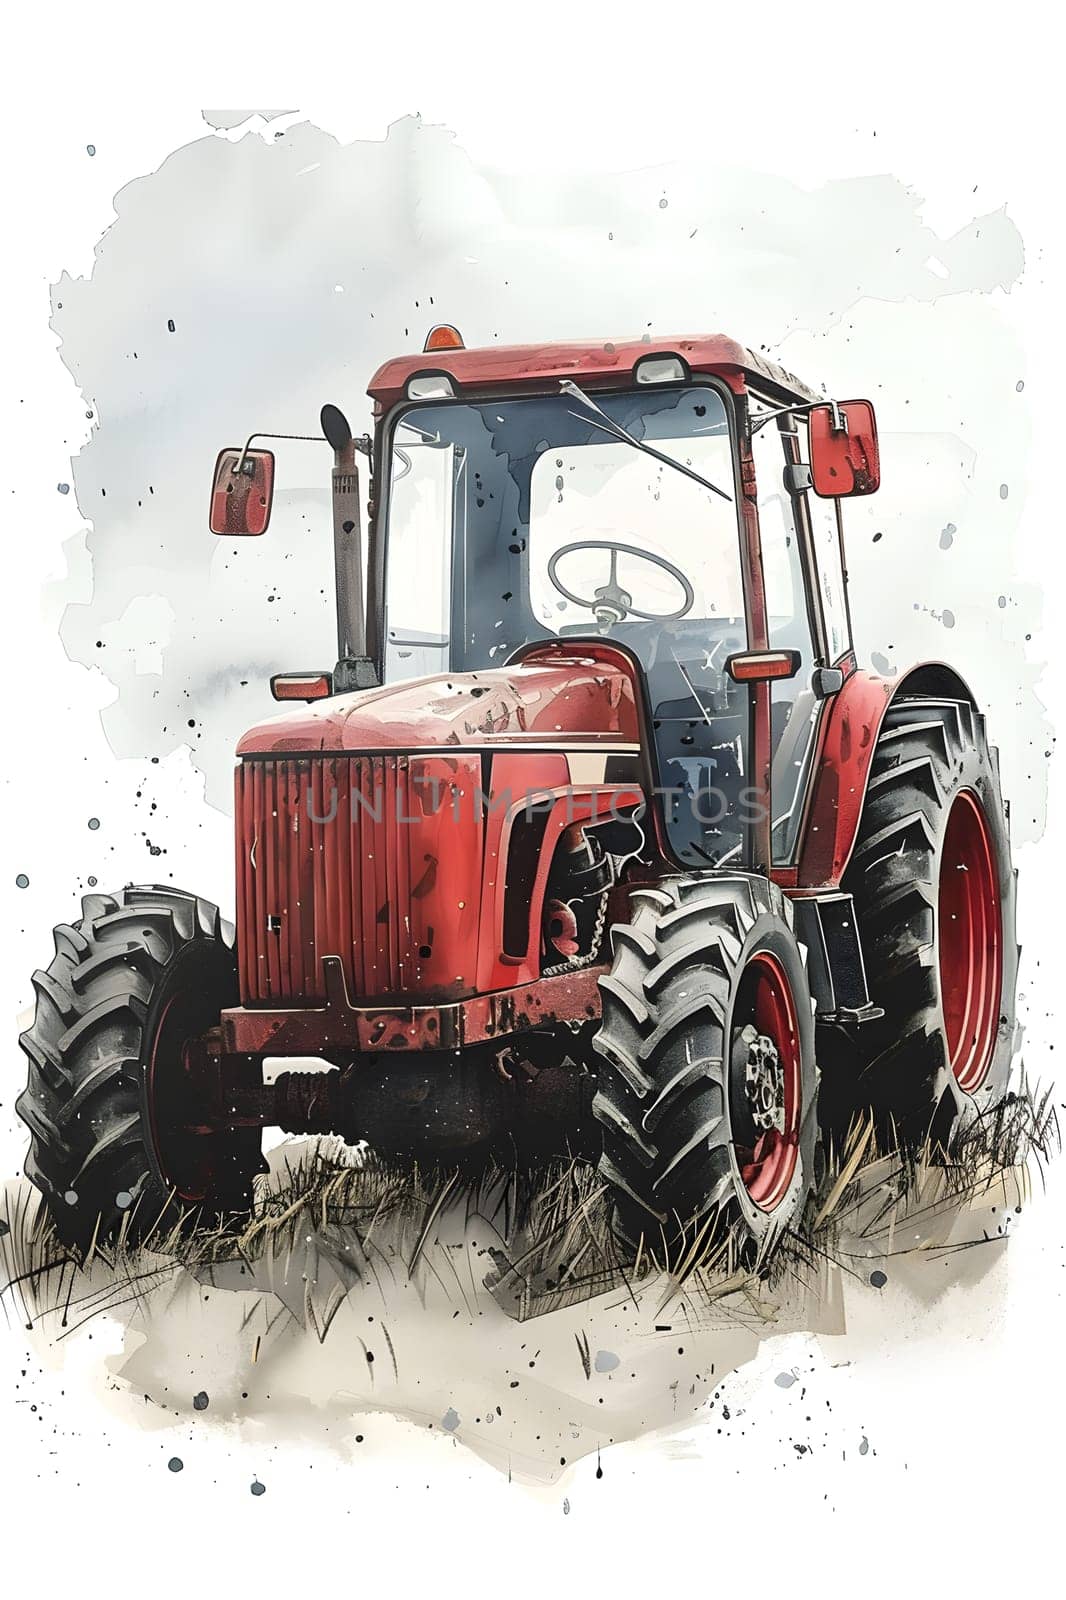 A red tractor with large tires and a sturdy fender is navigating through the mud in a watercolor painting, showcasing agricultural machinery in action